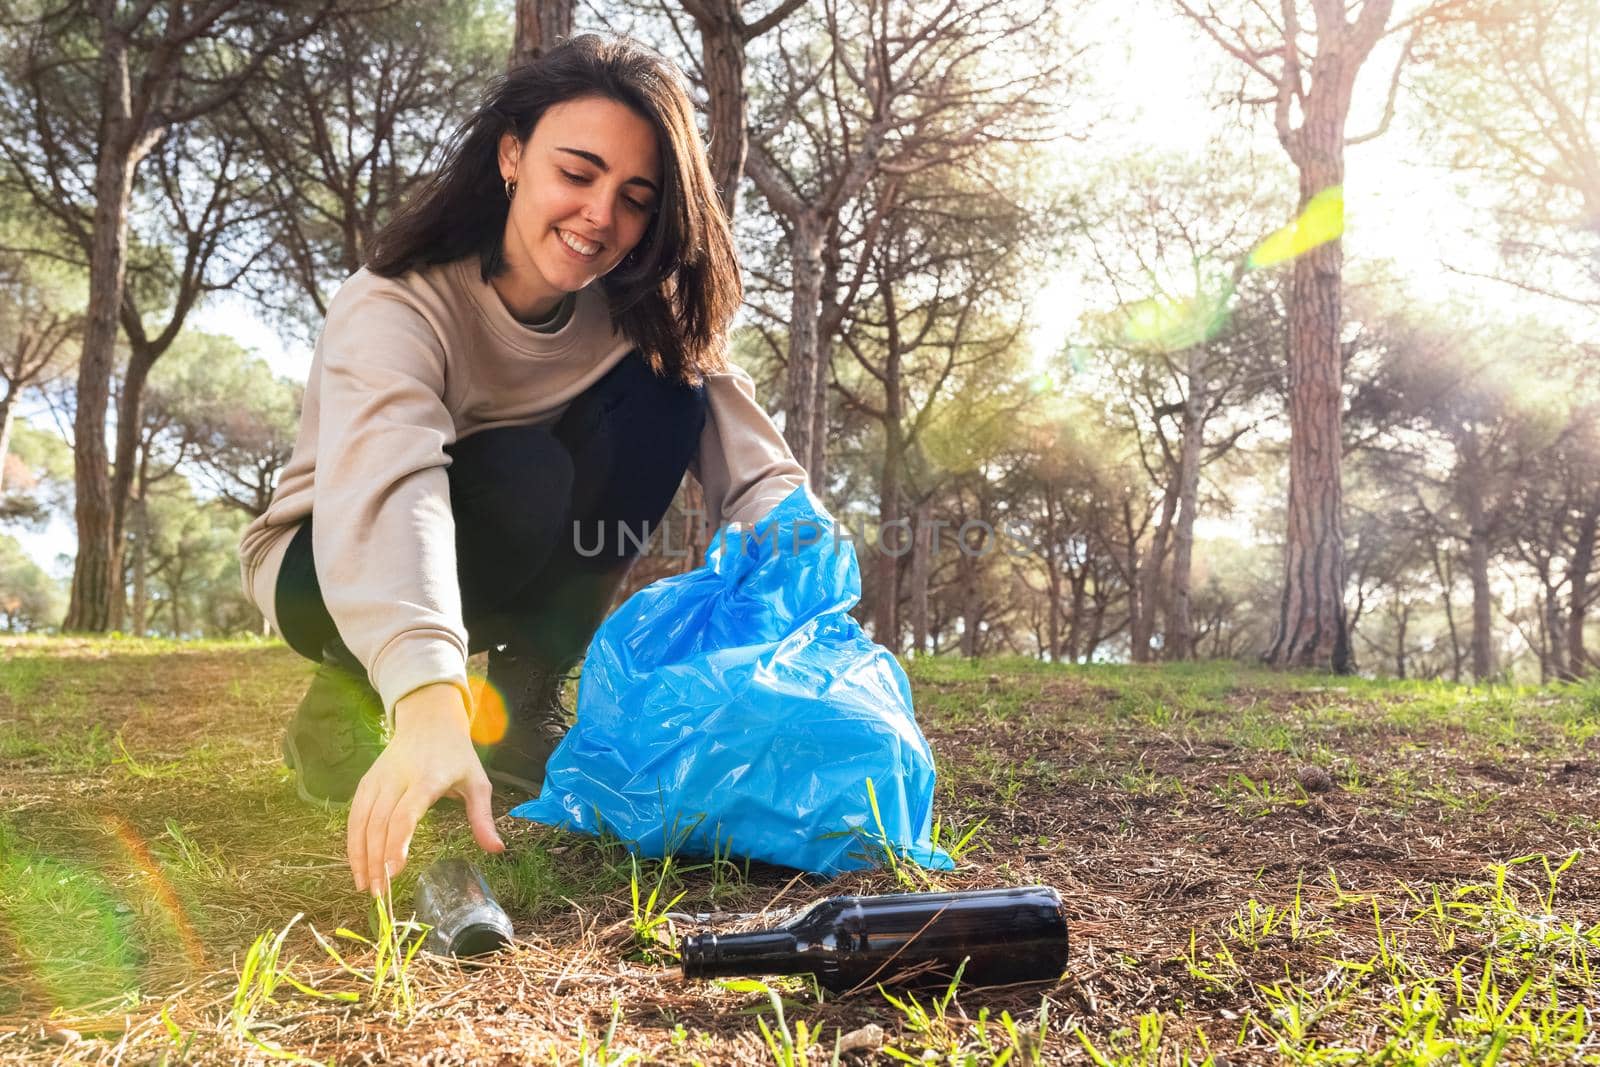 Smiling young caucasian woman pick up plastic bottle in the forest. Copy space. Environmental activist concept.